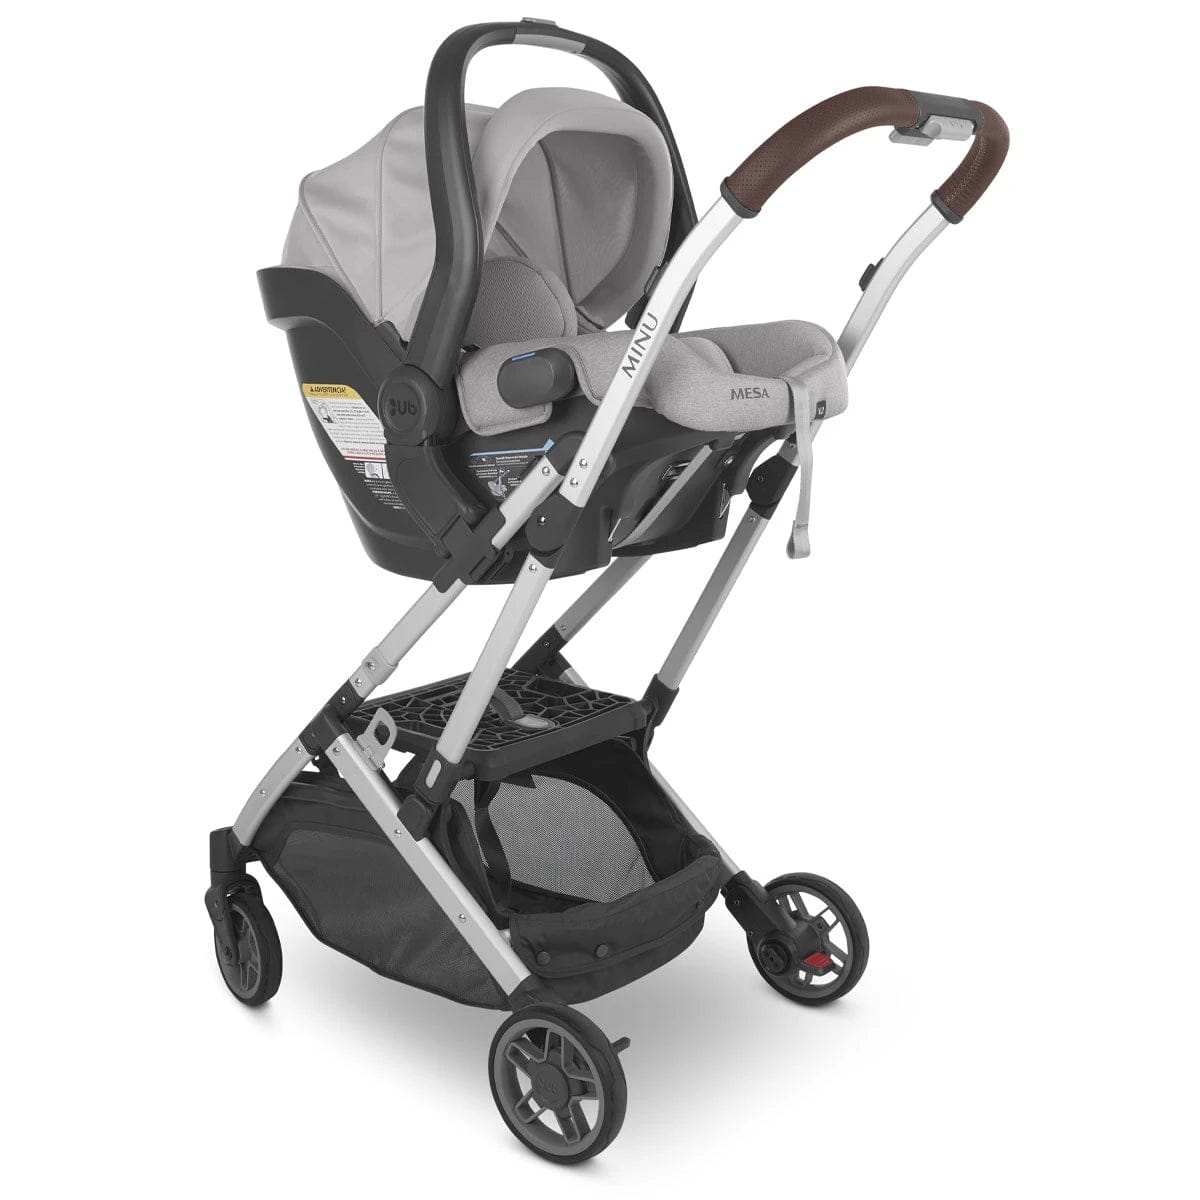 UPPAbaby infant car seat UPPAbaby MESA V2 Infant Car Seat - Alice